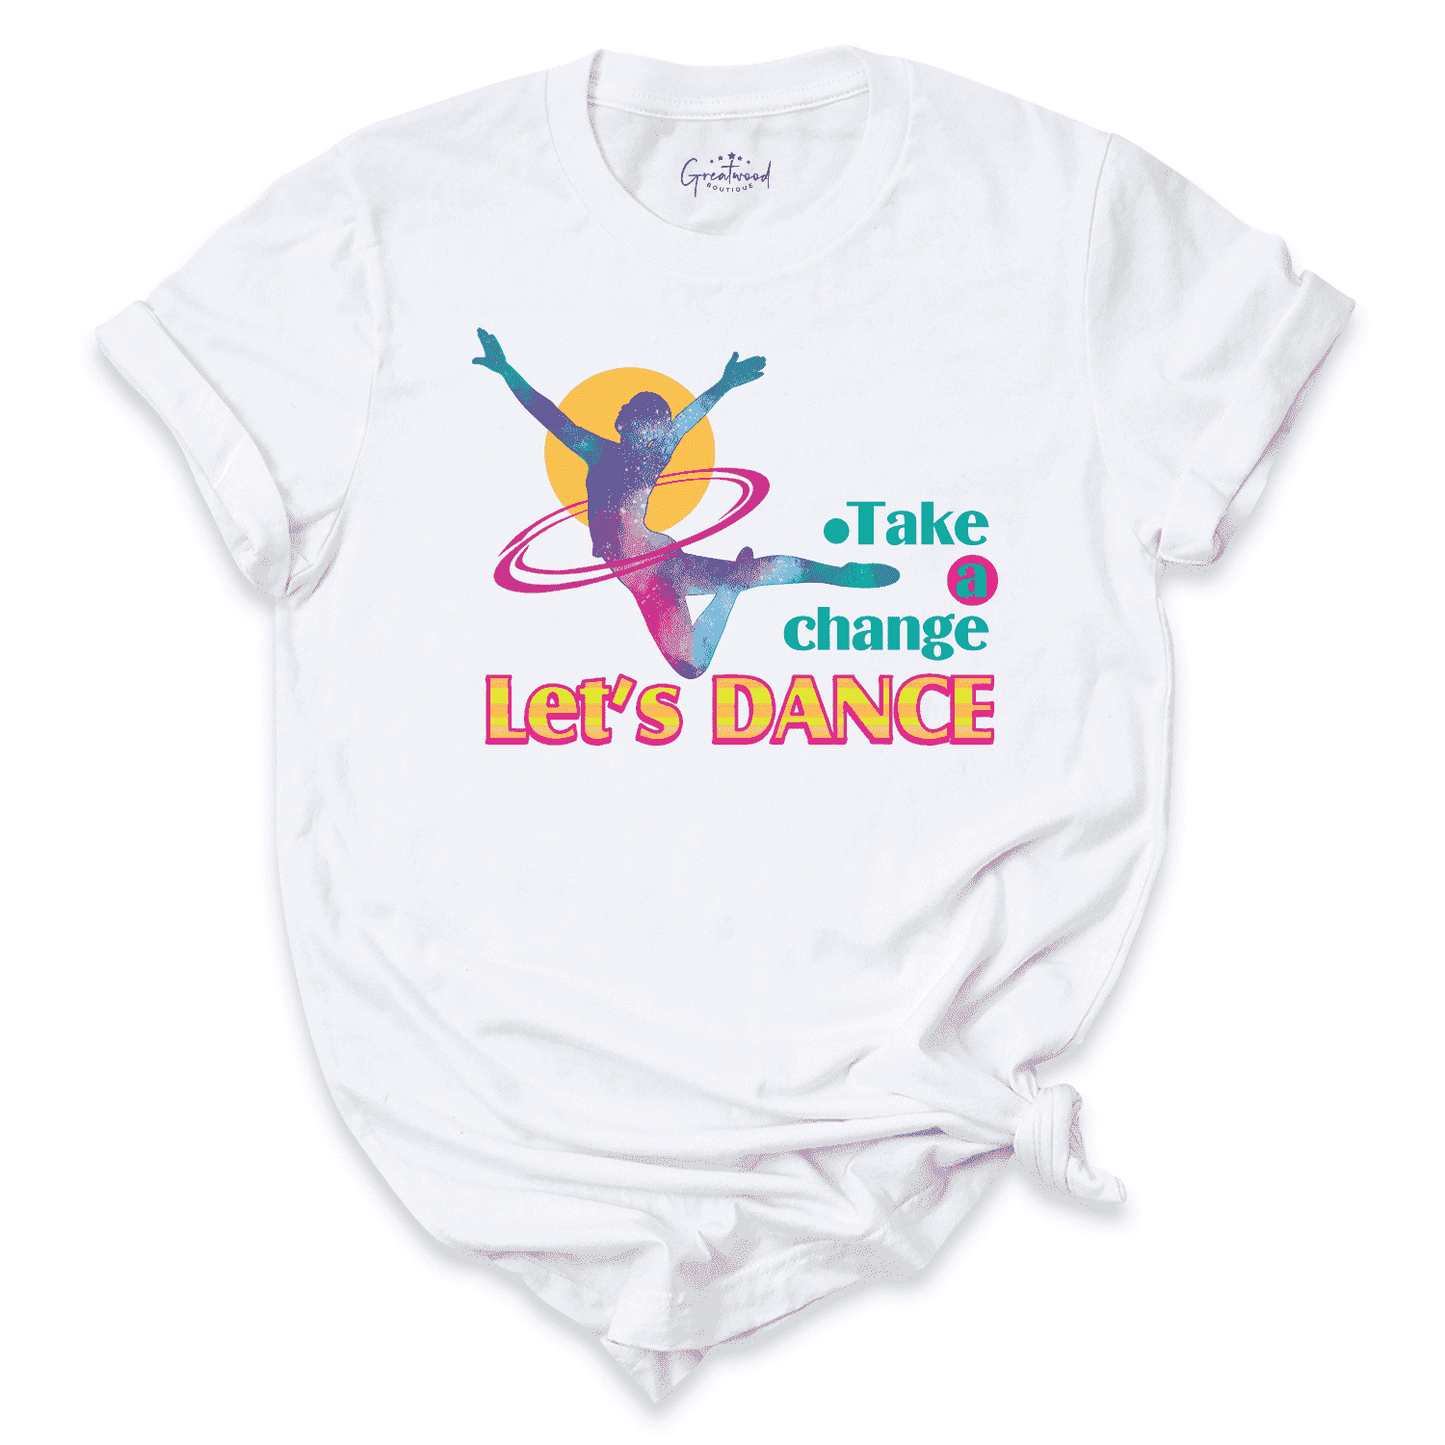 Let’s Dance Shirt White - Greatwood Boutigue